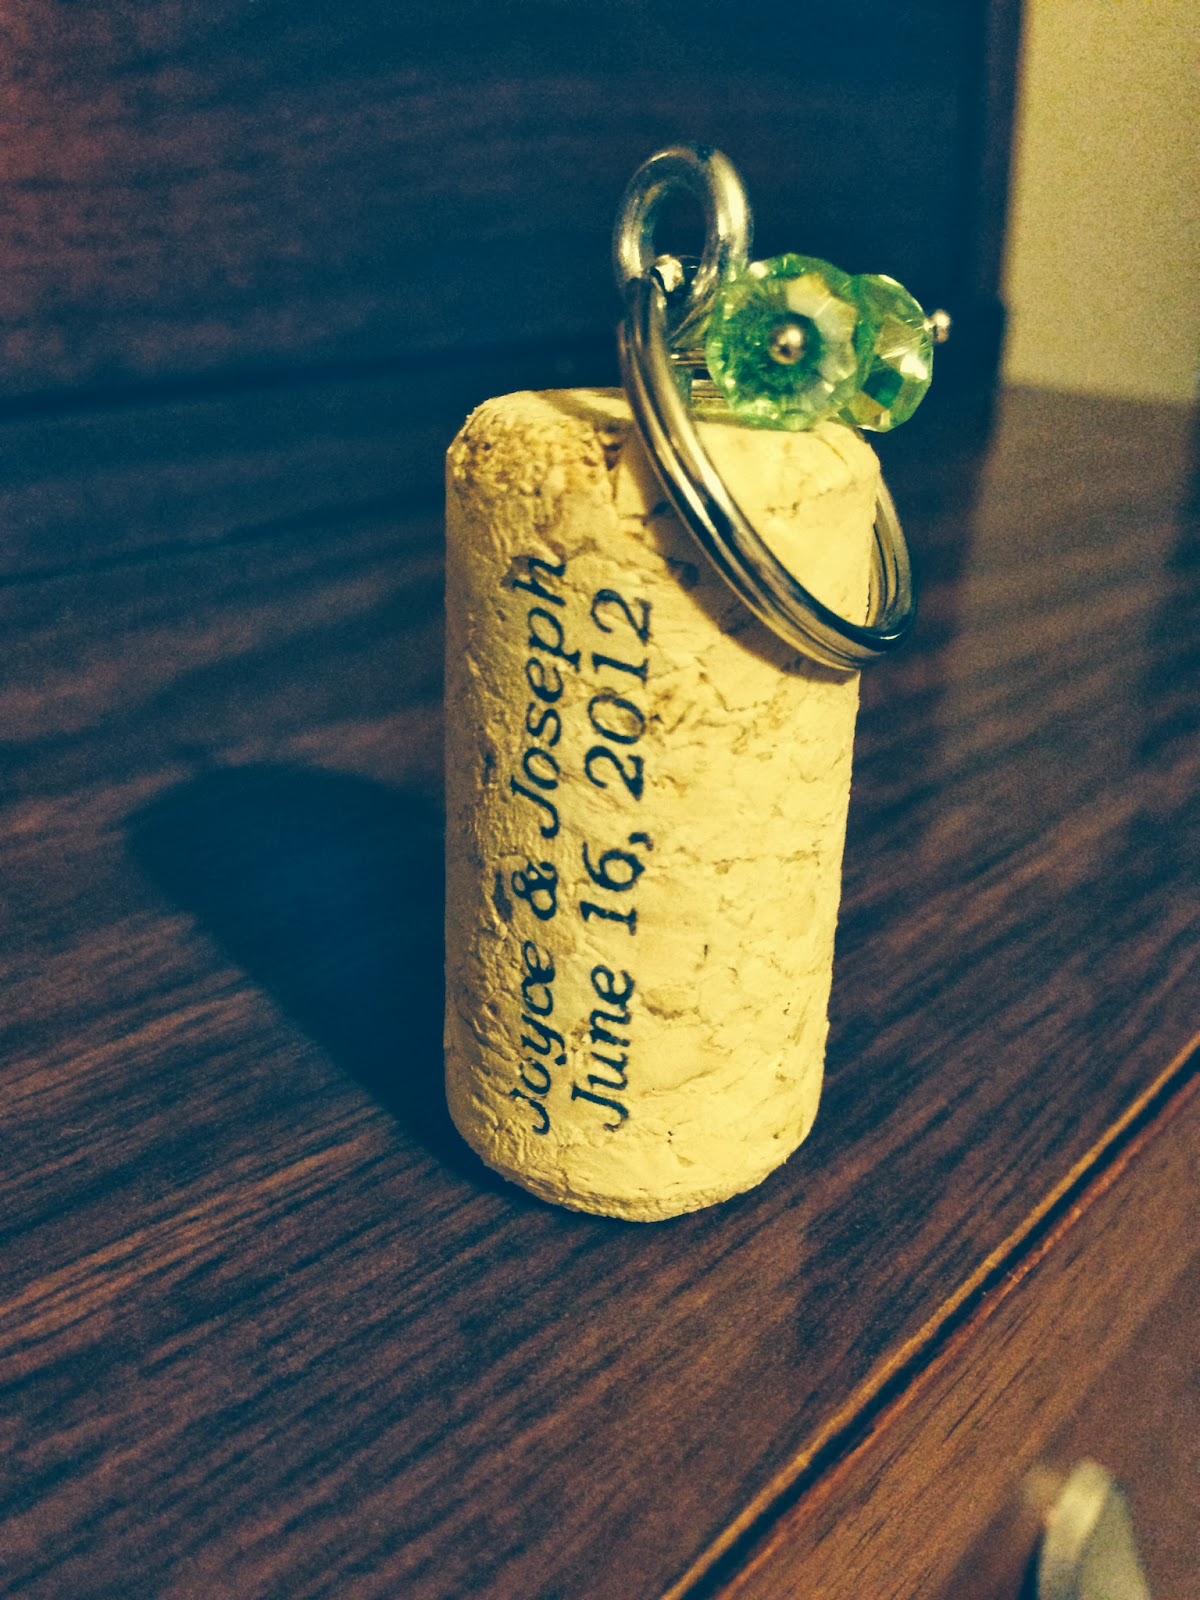 How to Make a Wine Cork Key Chain Party Favor